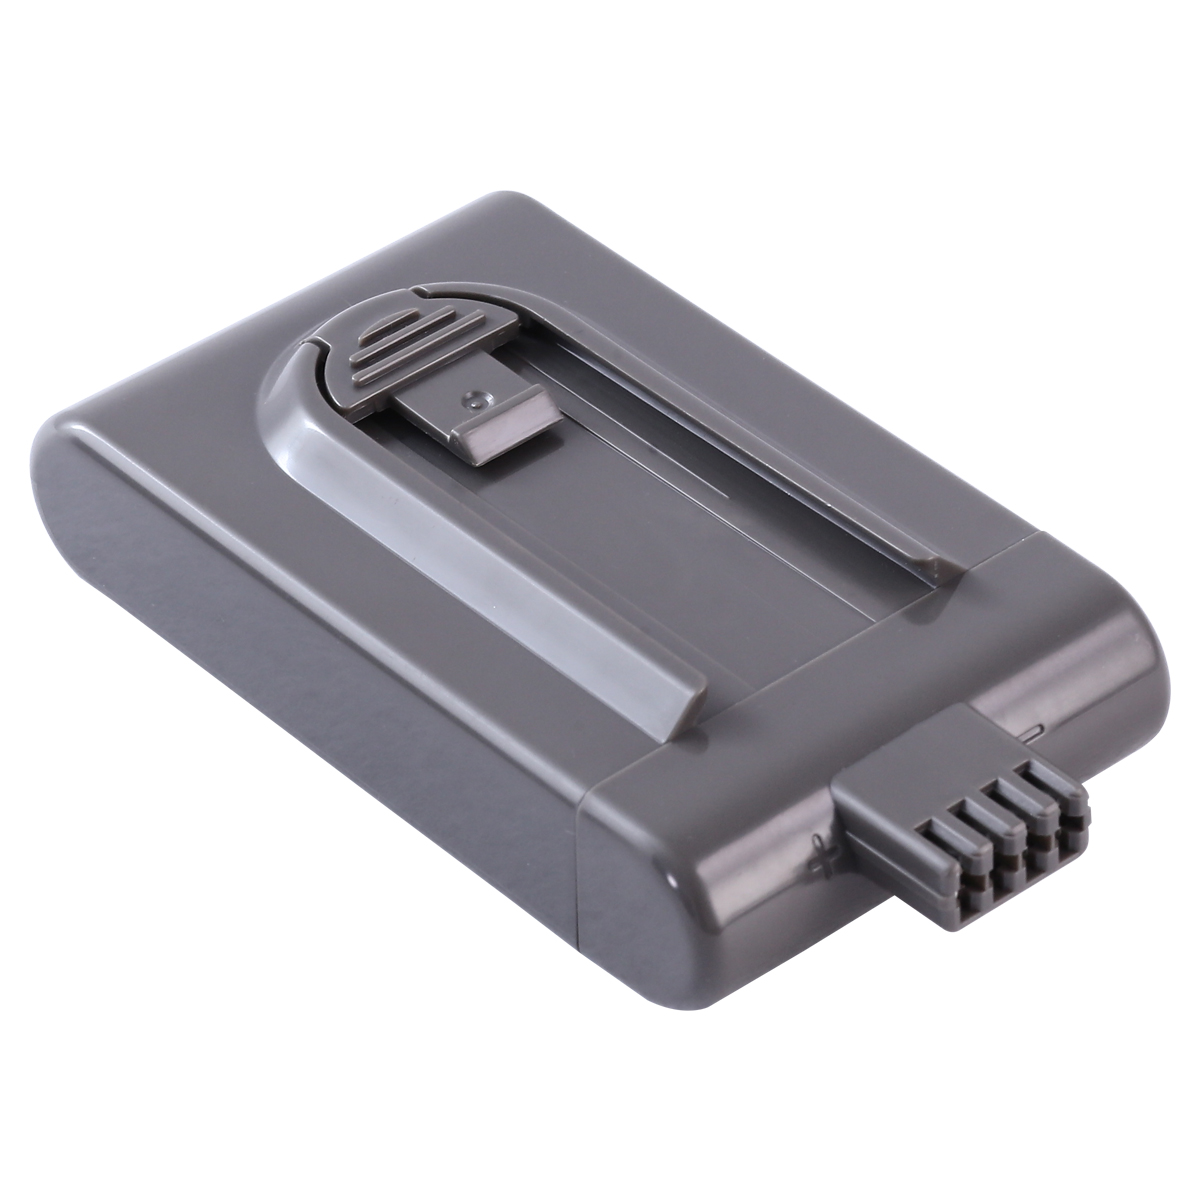 For Dyson V6 21.6V 2000mAh 2.0Ah Li-ion Battery Cordless Vacuum Cleaner Replacement Battery